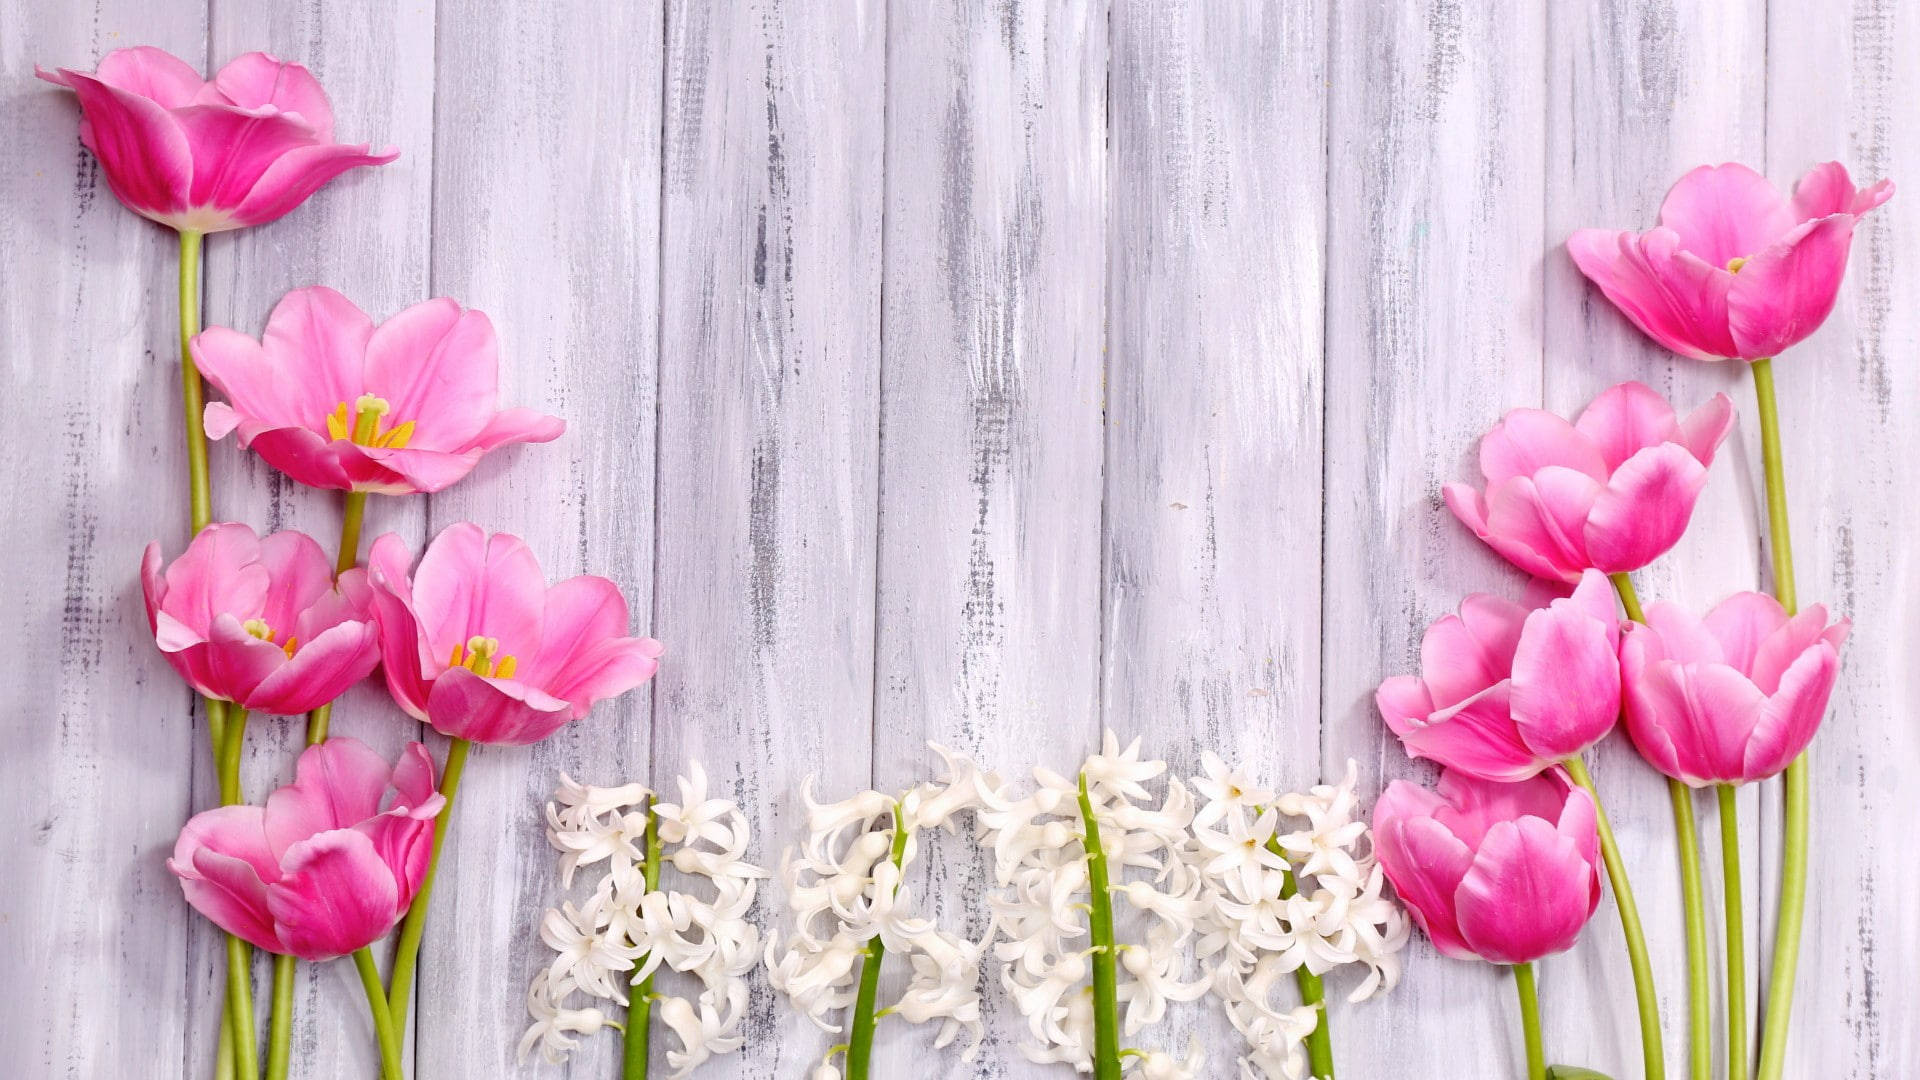 Background Design With Flowers Background